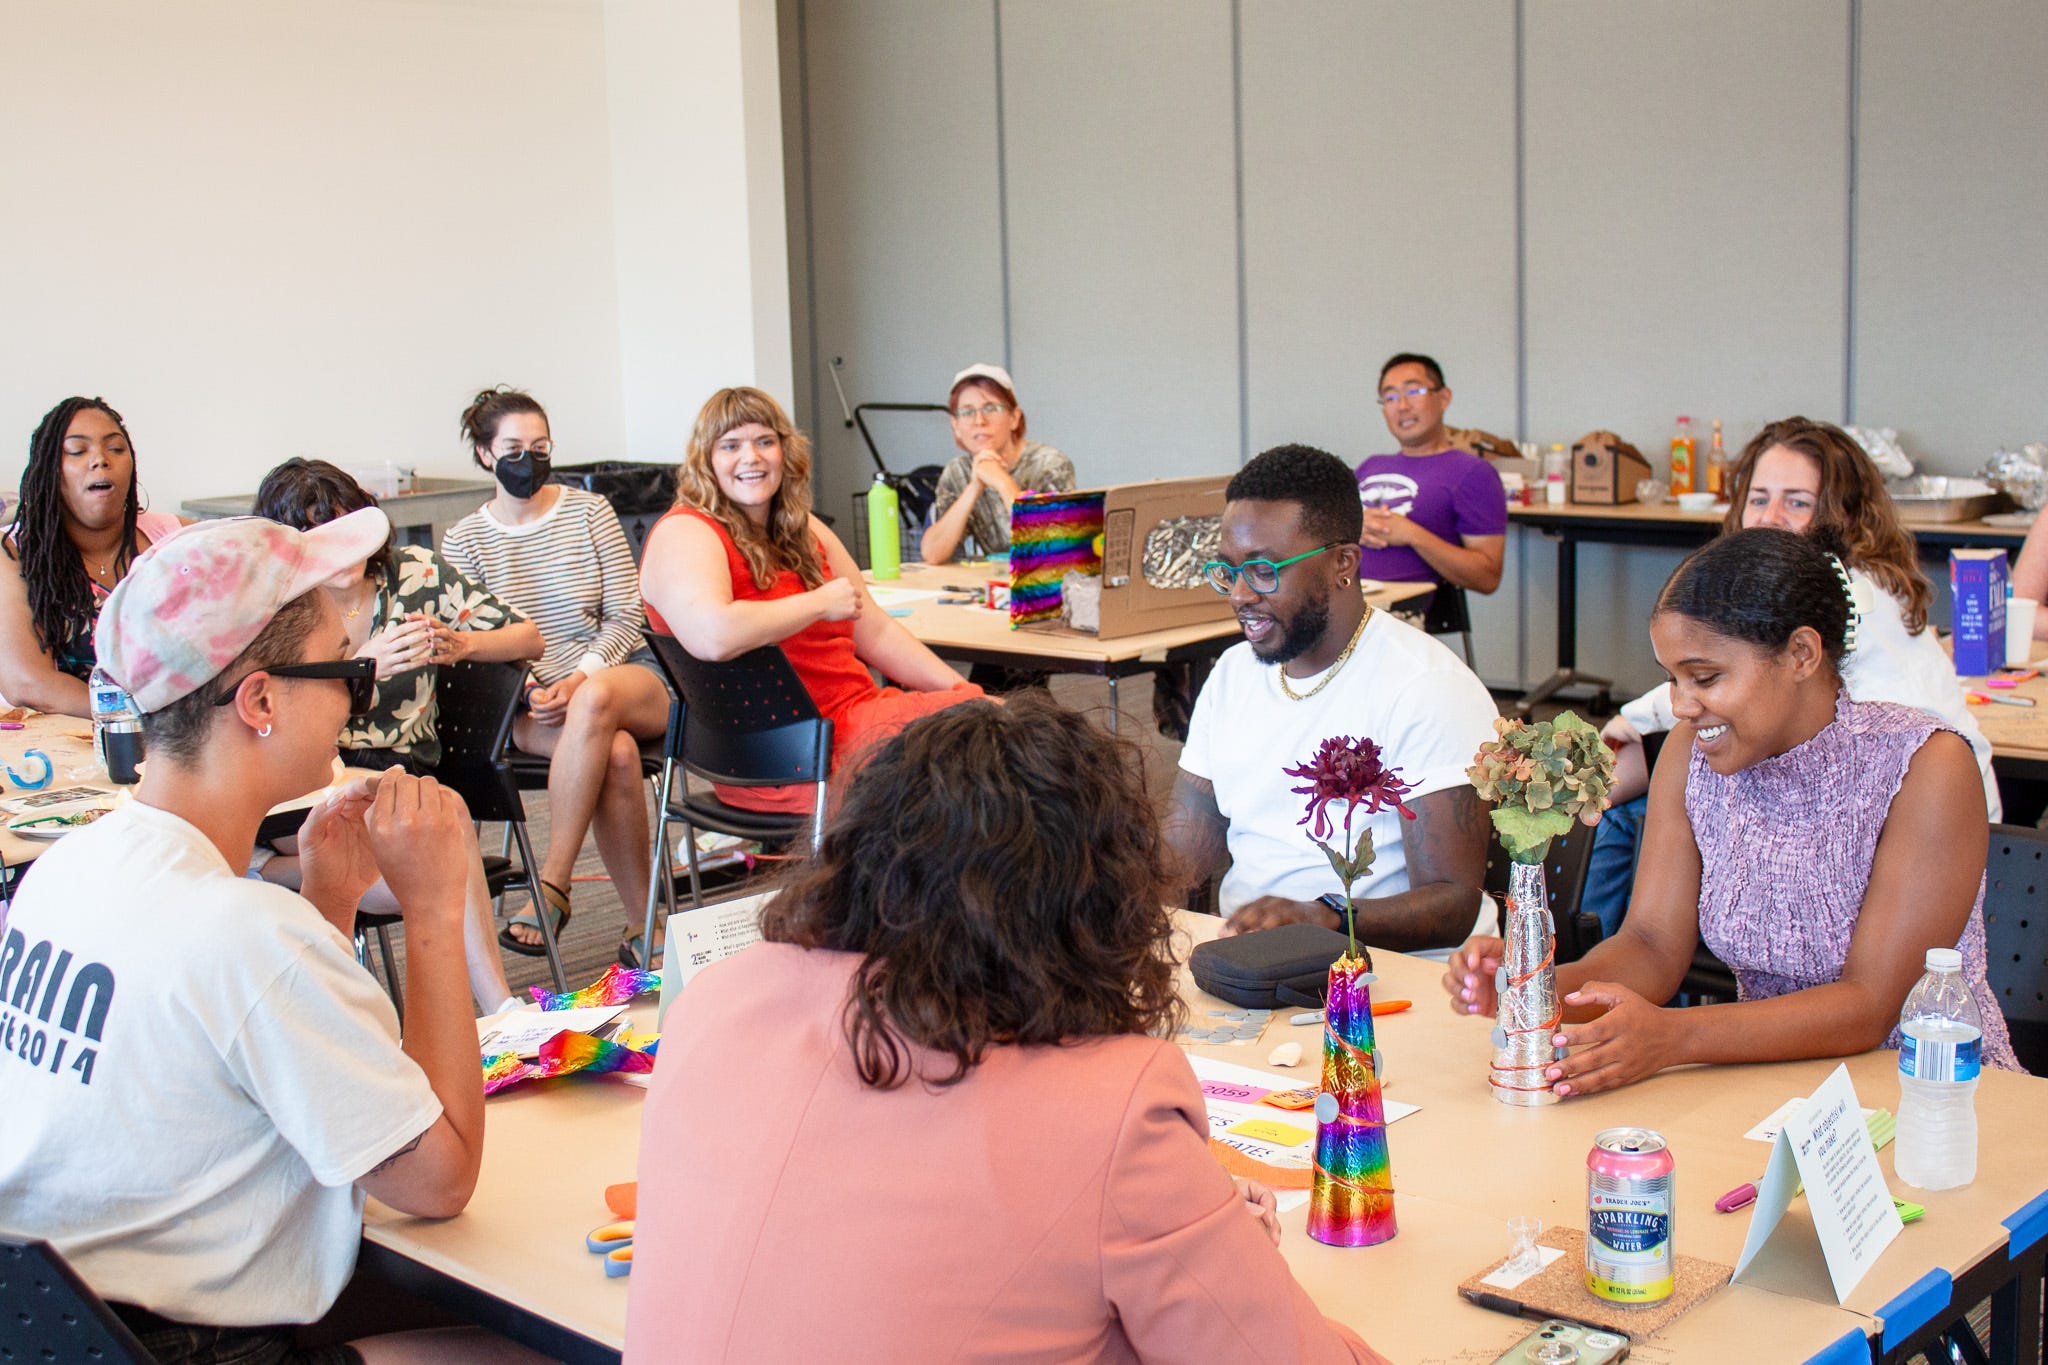 In this wide shot of a room full of workshop participants, about 10 people look on, smiling, while listening to MARS (a brown-skinned person in a white shirt and glasses) describe his creation. Imagined abolitionist artifacts populate the table tops, made out of art supplies like cardboard and flowers and more.